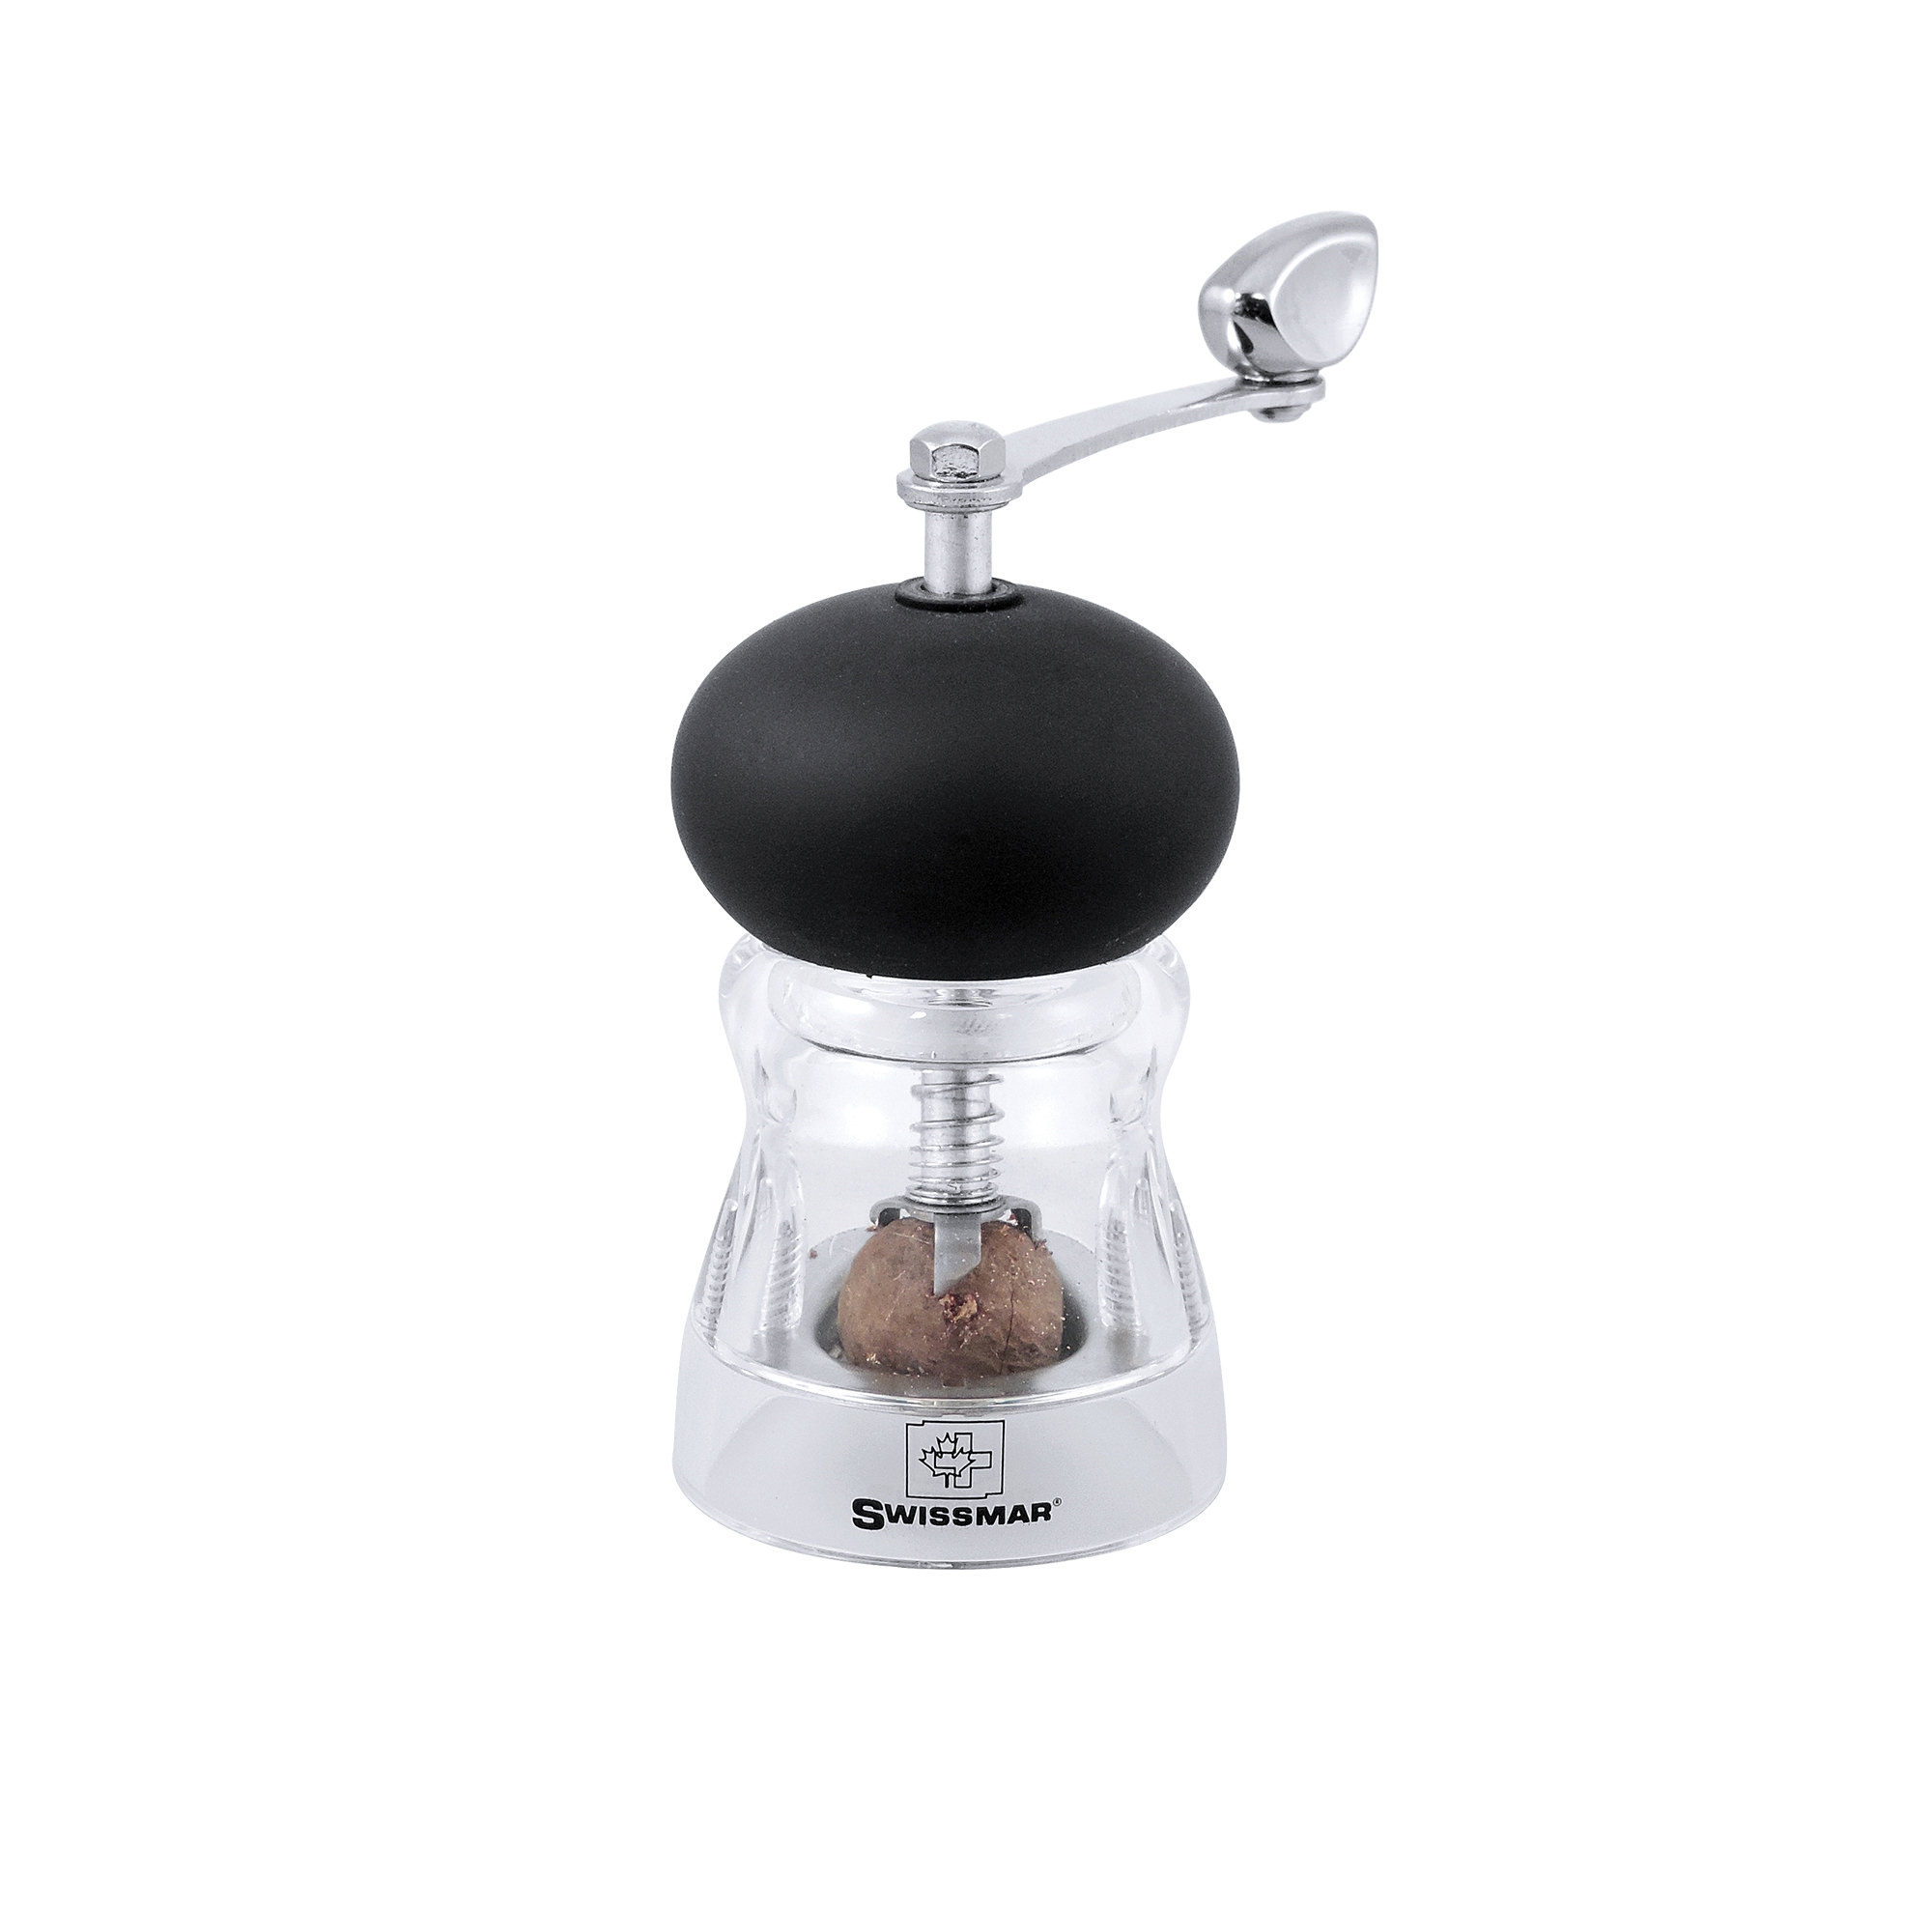 Swissmar Nutmeg Mill with Soft Touch Top Black Image 1